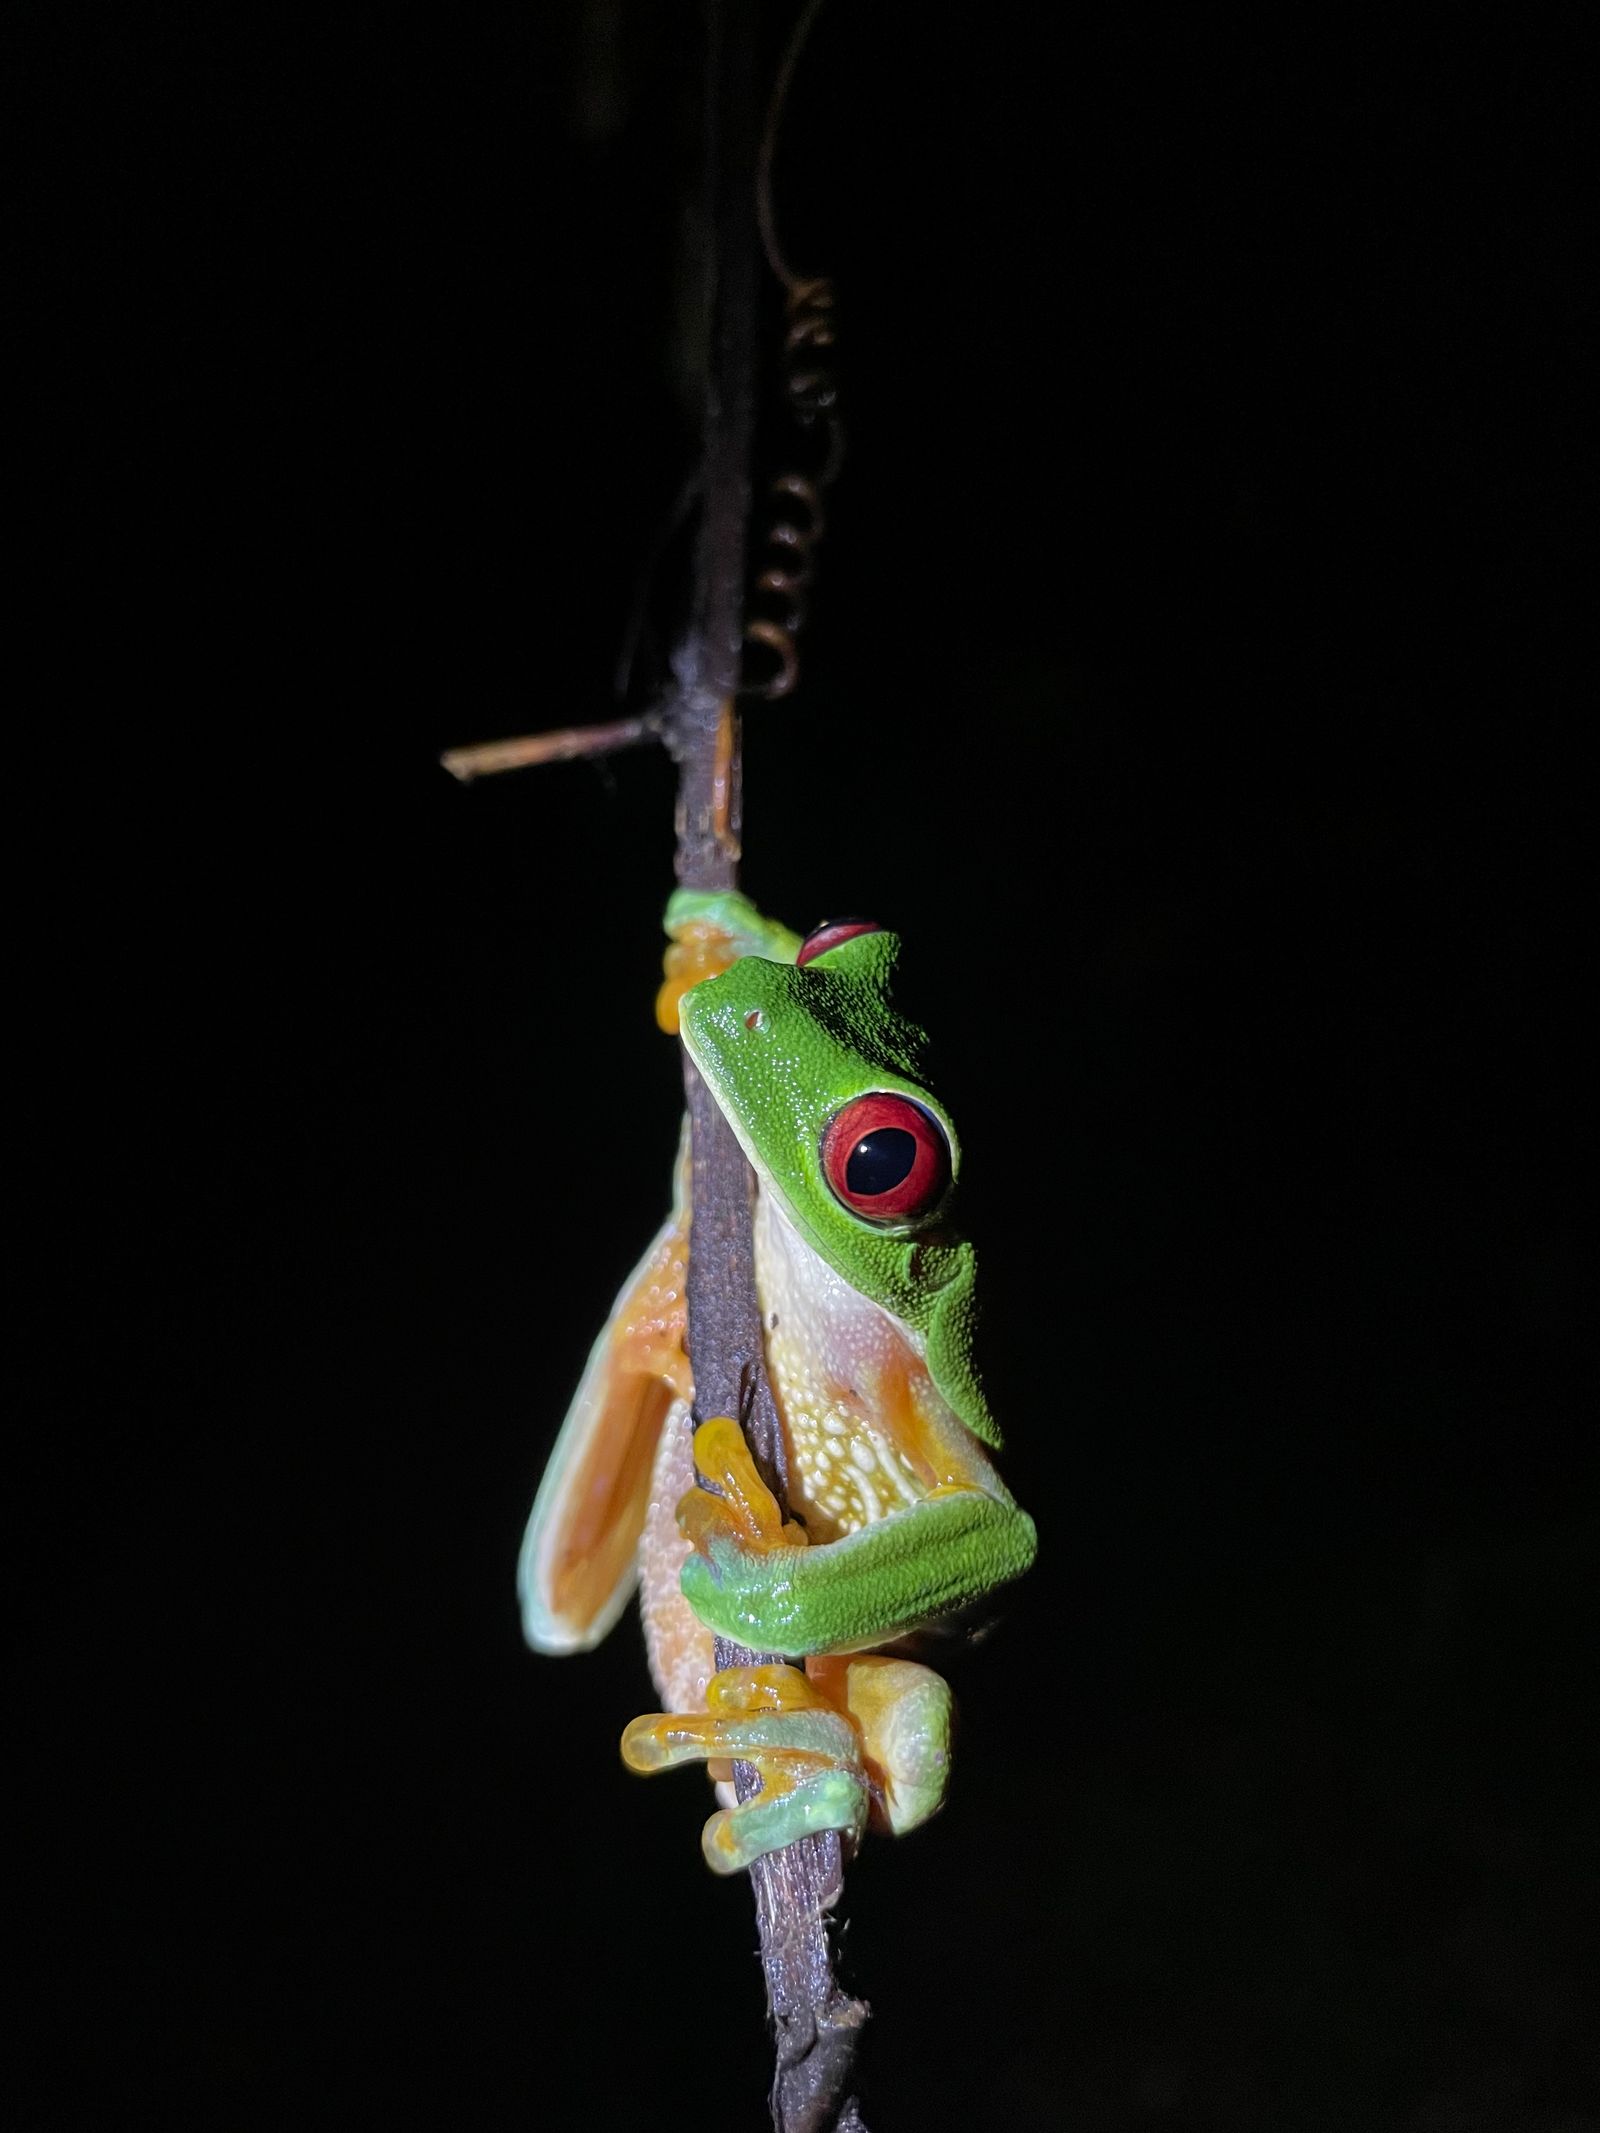 Being watched: red eye tree frog